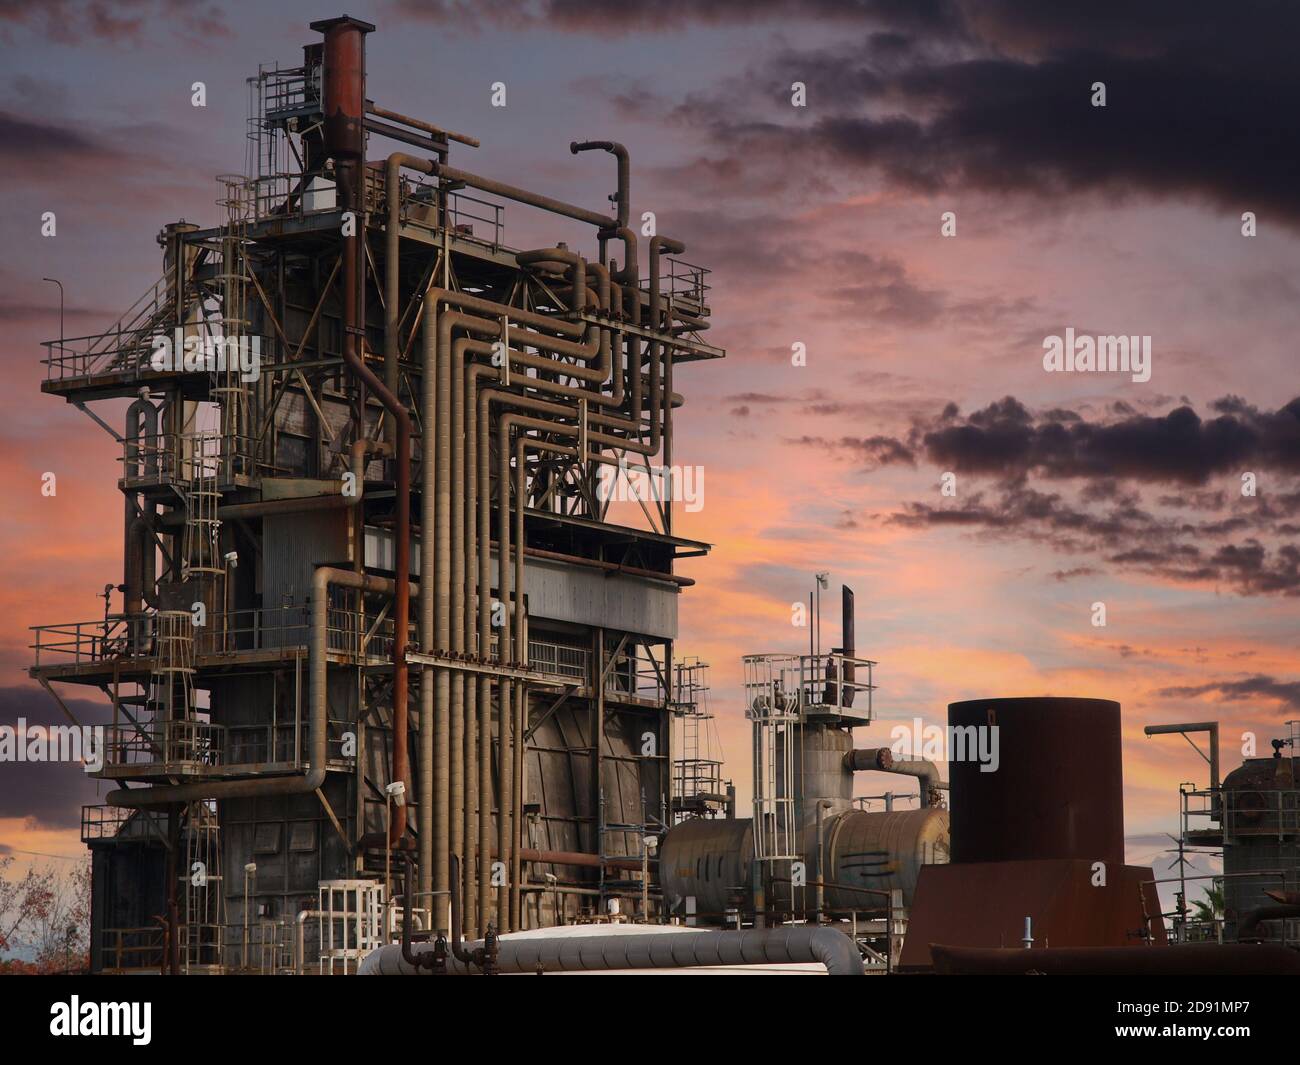 View of old rusty closed oil refinery tower with sunset sky. Stock Photo